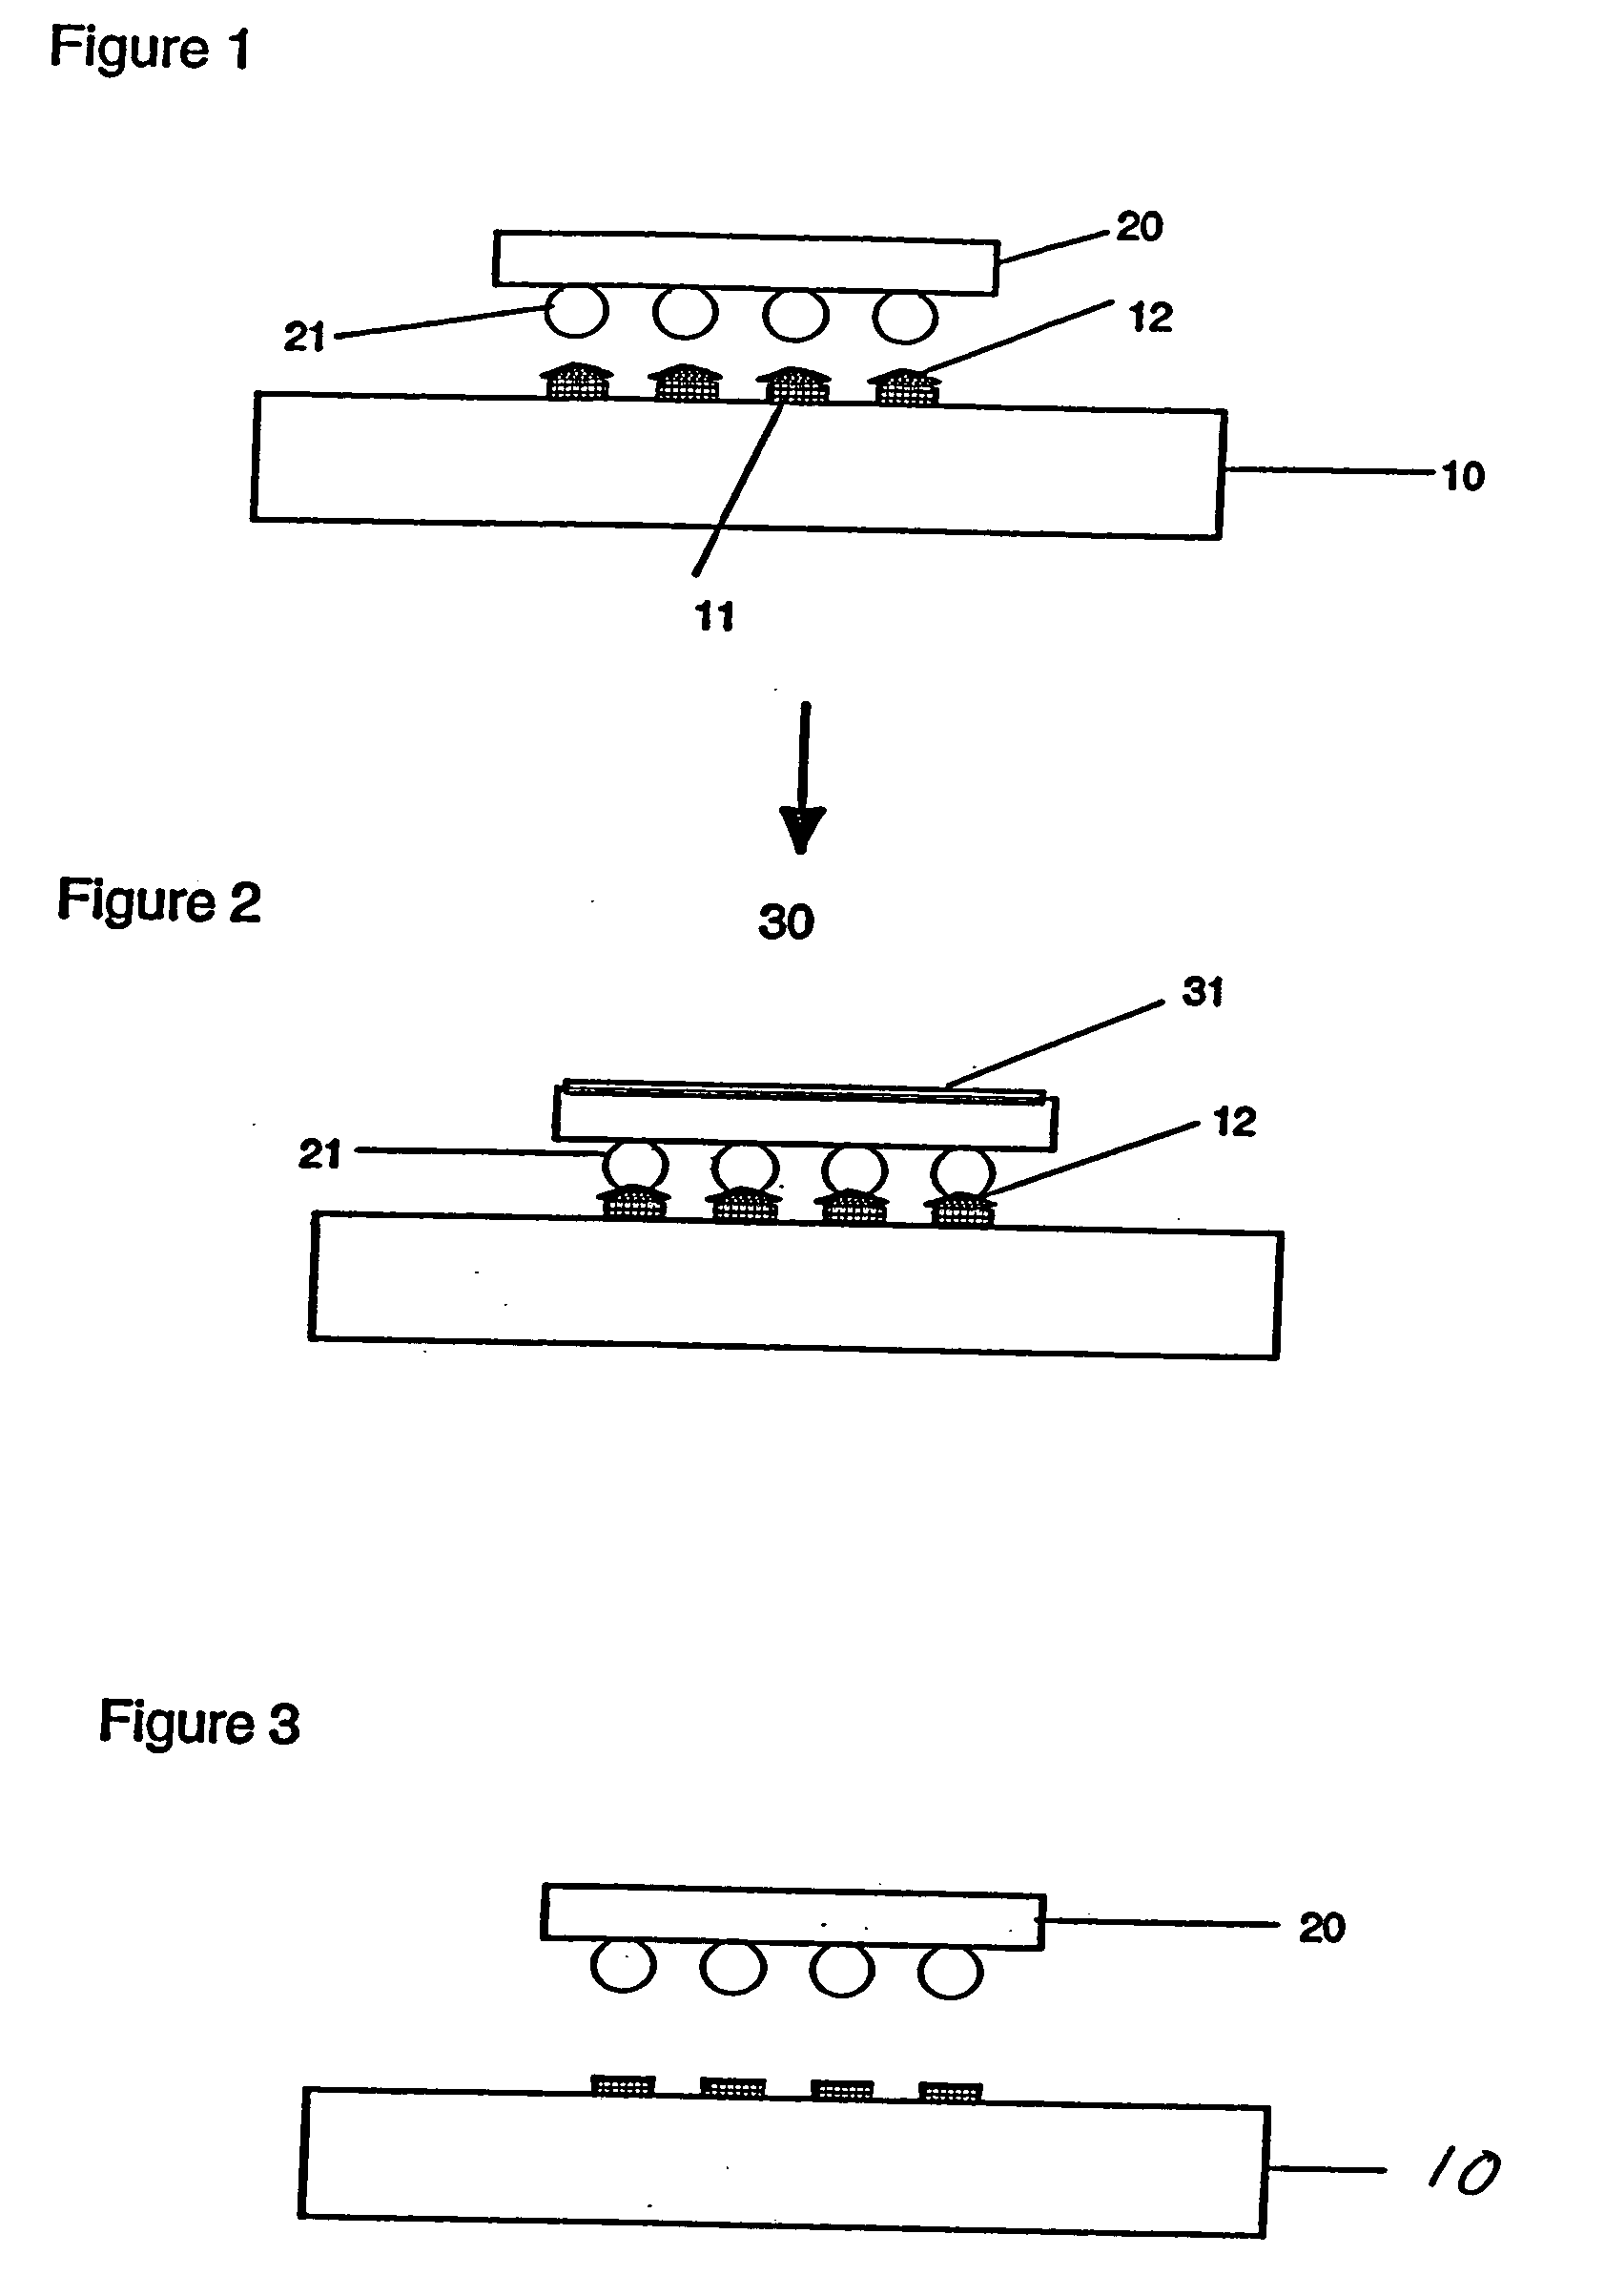 Temporary chip attach method using reworkable conductive adhesive interconnections